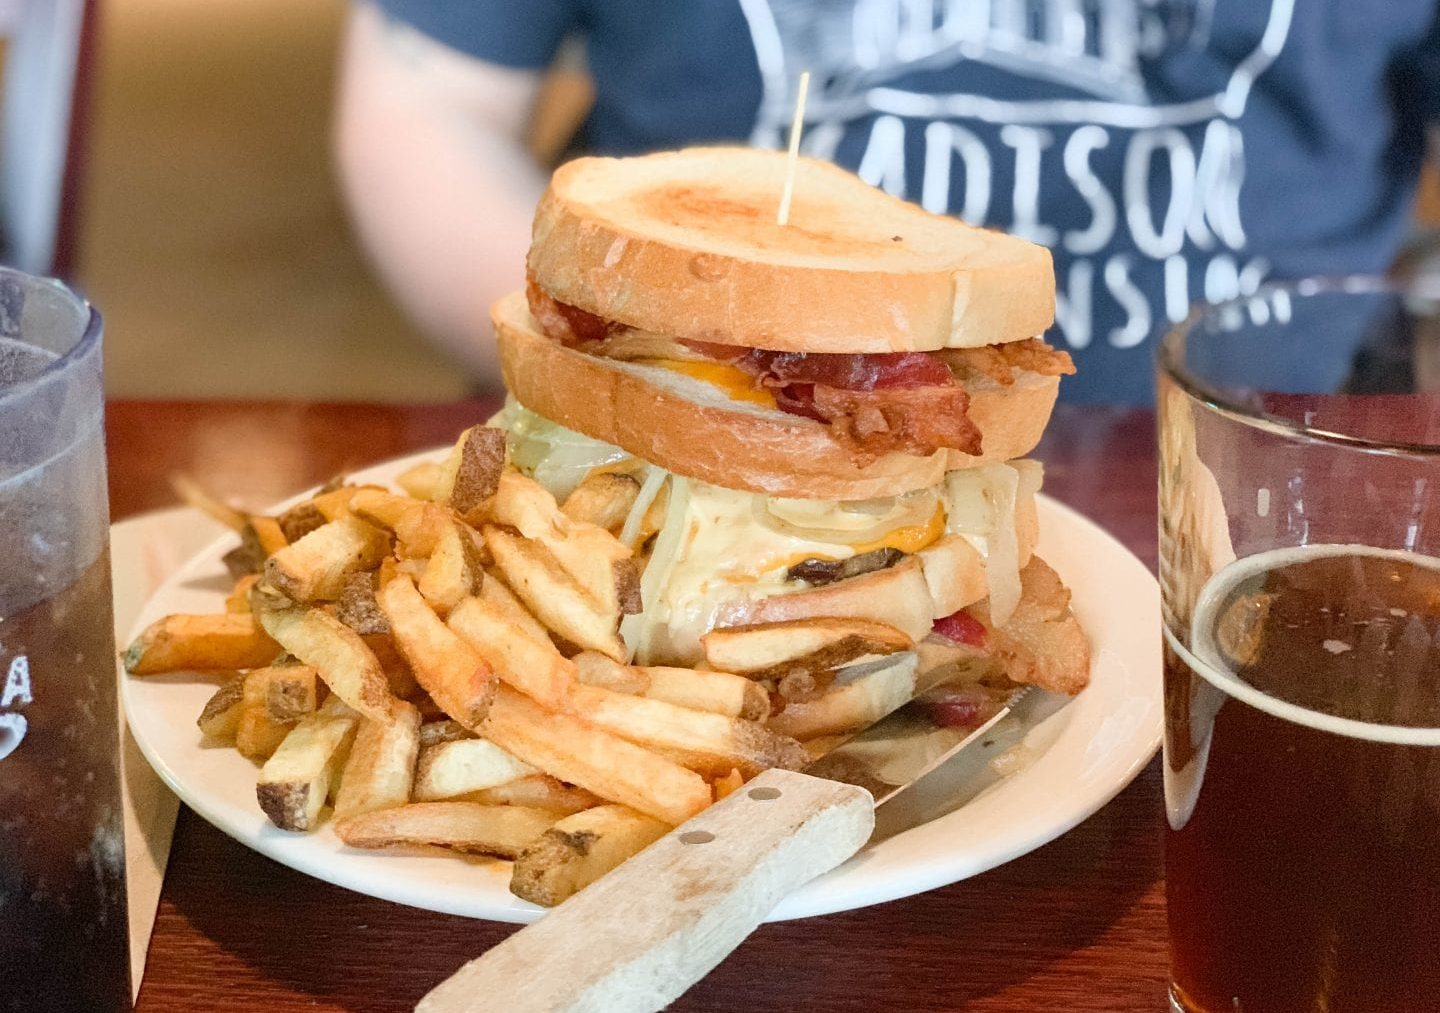 Article: Bring your appetite: The best places to eat in Marshfield | burger at blue heron brew pub marshfield wi